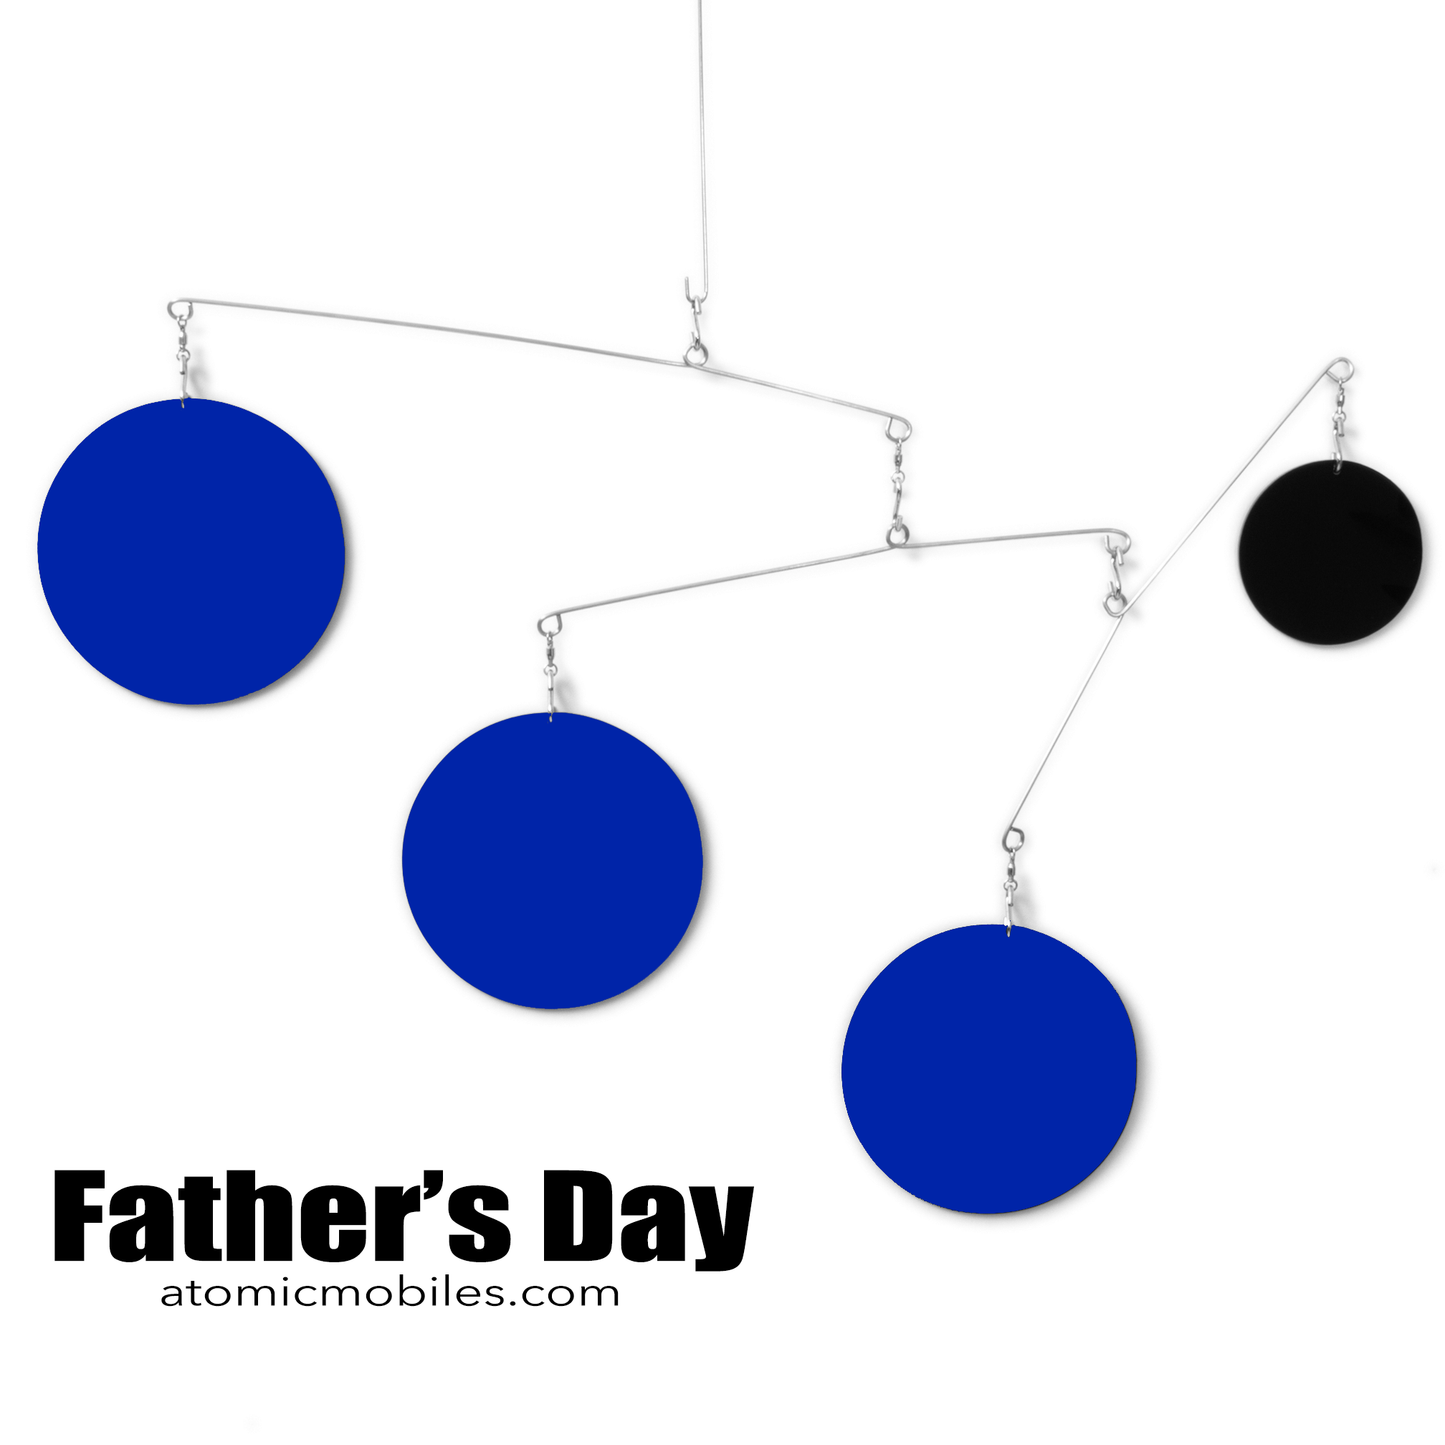 Unique Father's Day Decoration and Gift - kinetic hanging art mobile in Father's Day colors of Navy Blue and Black by AtomicMobiles.com